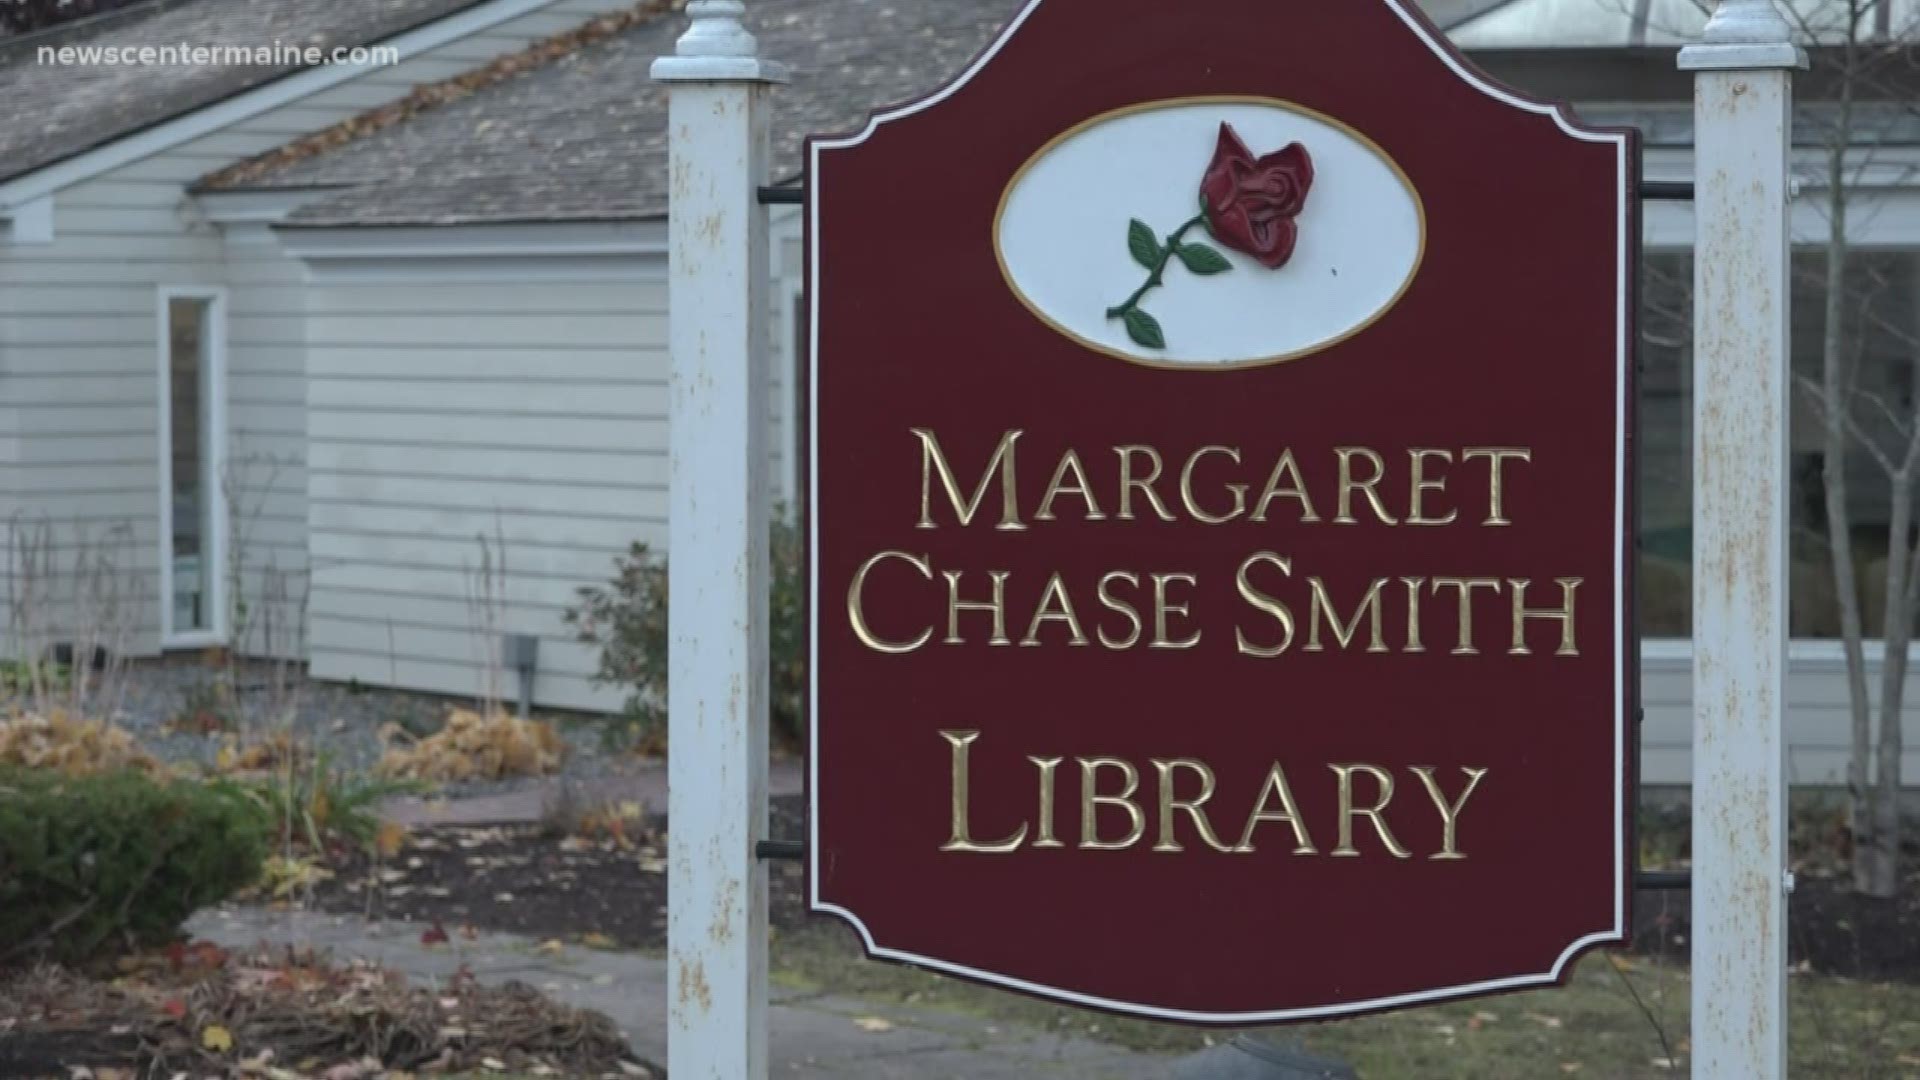 The Margaret Chase Smith Library in Skowhegan held an event Friday to discuss the history of women's fight for the right to vote.